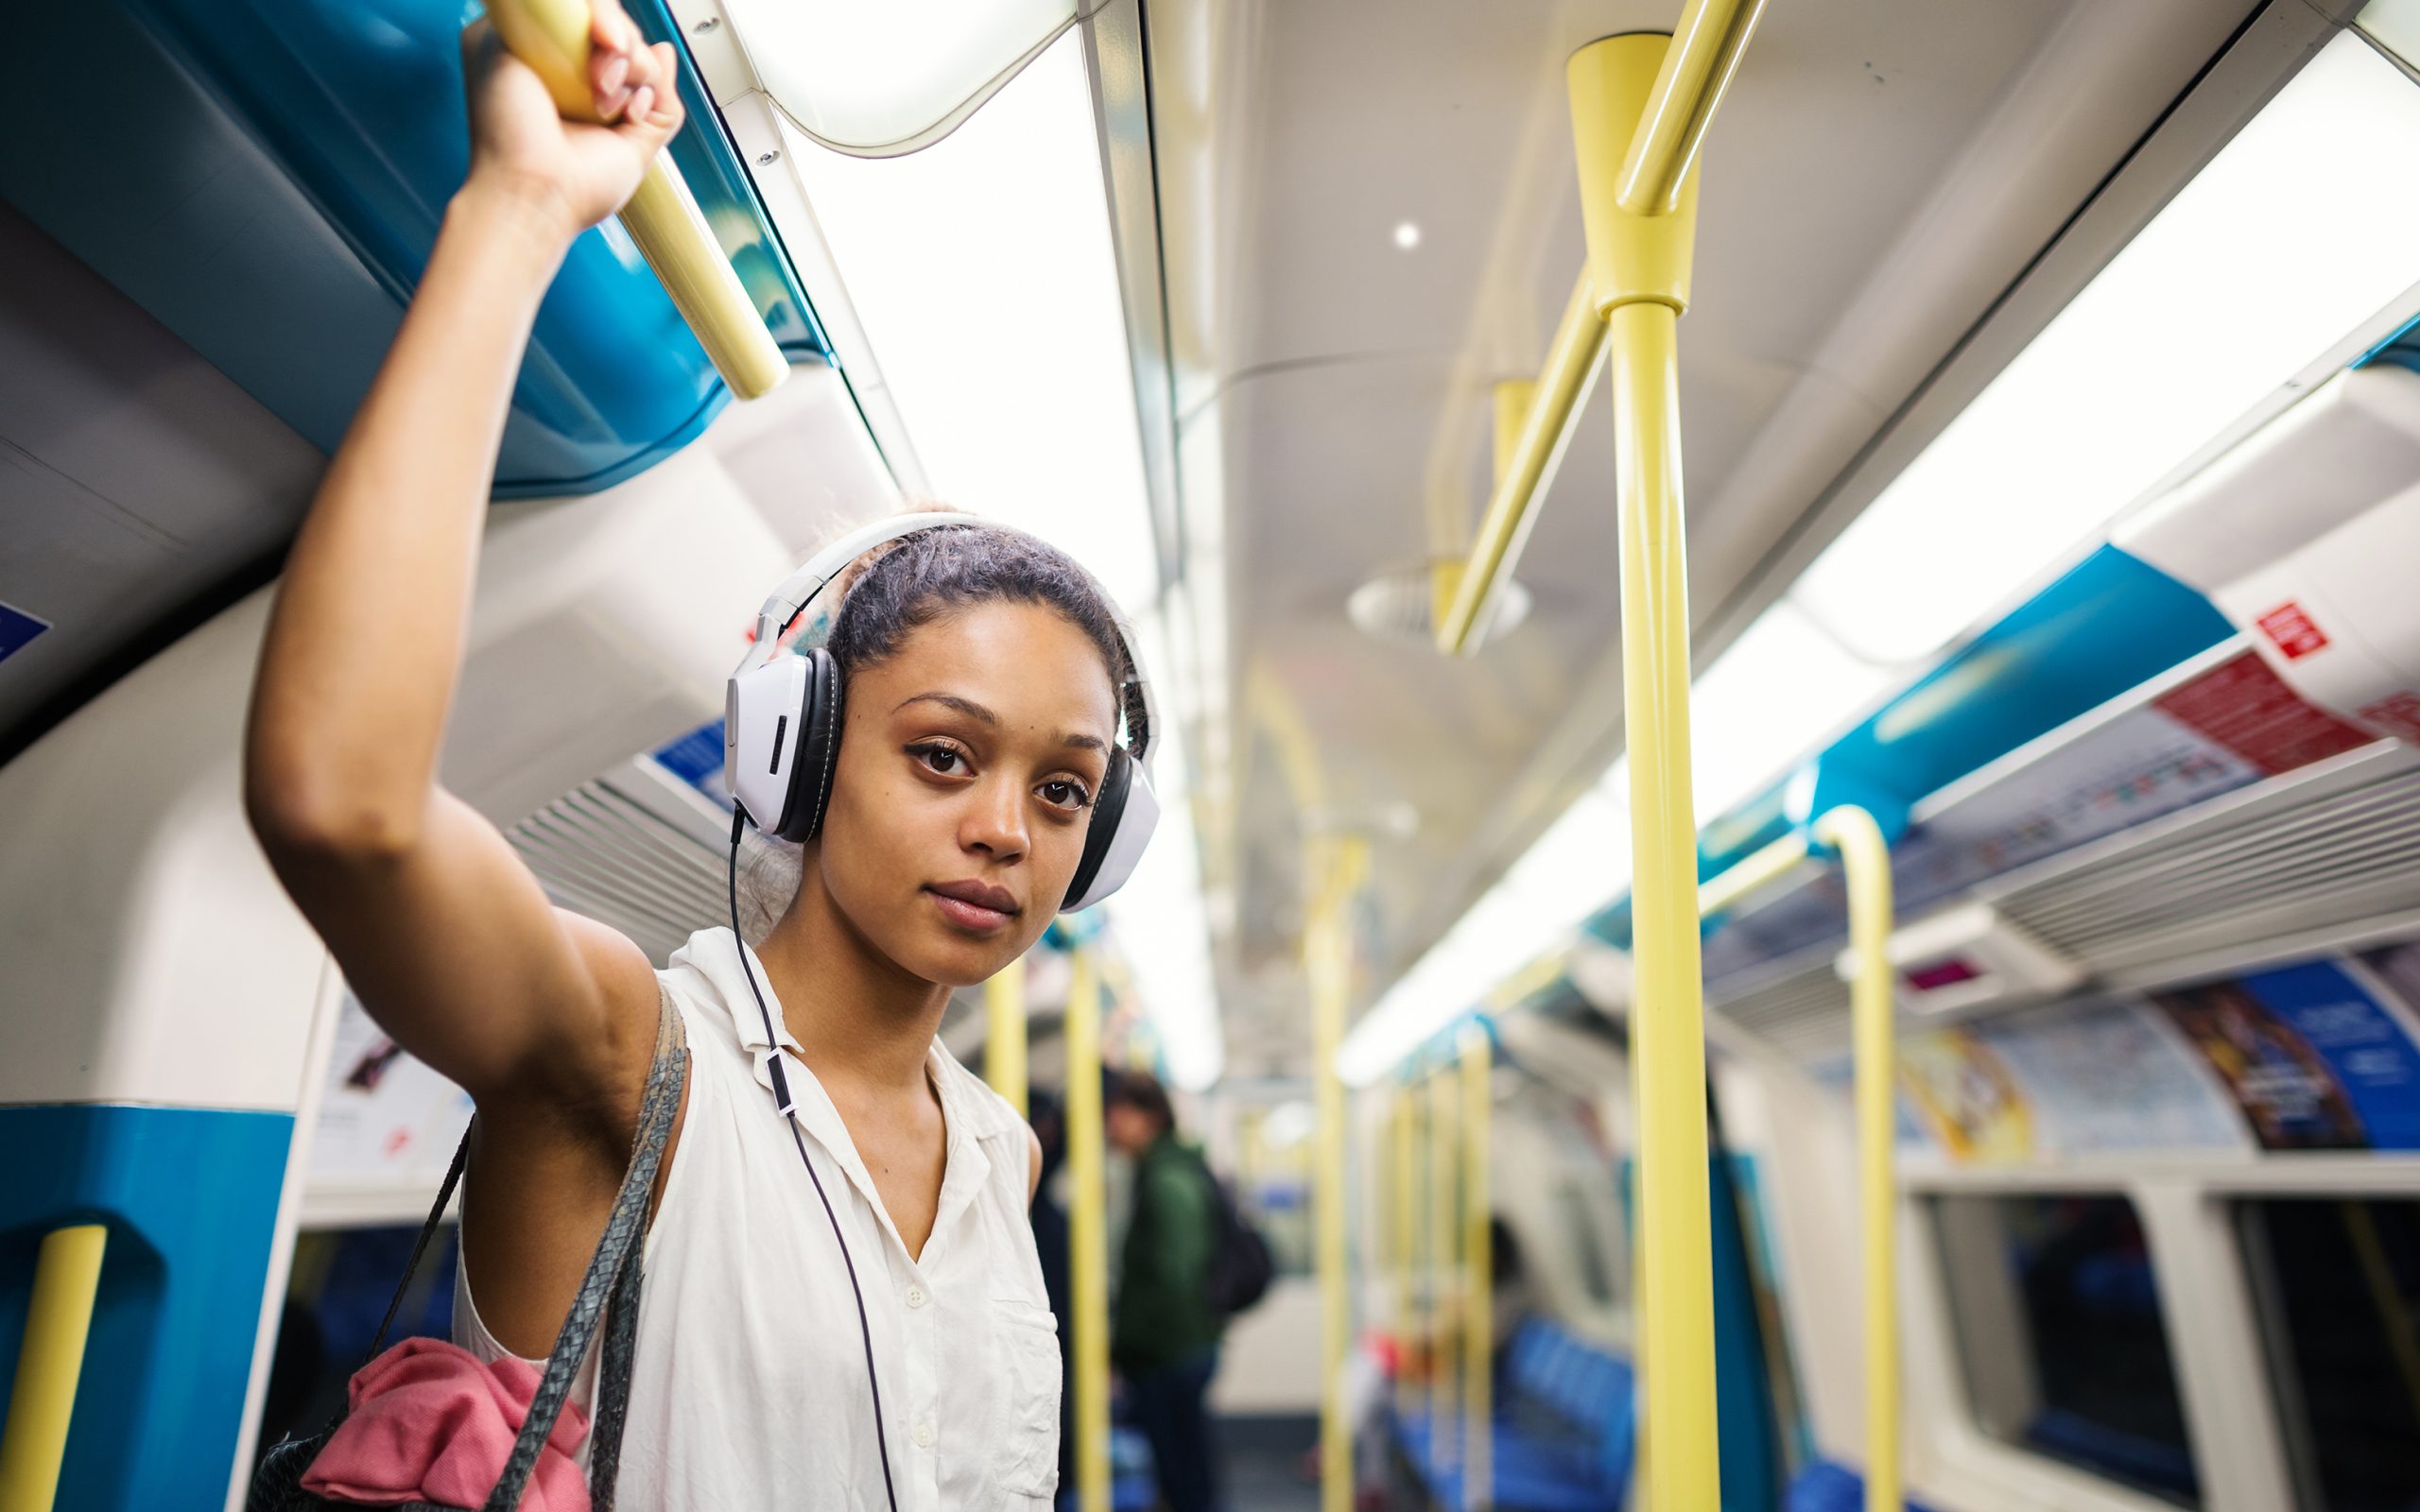 Young person in their early twenties standing up on a tube train wearing headphones